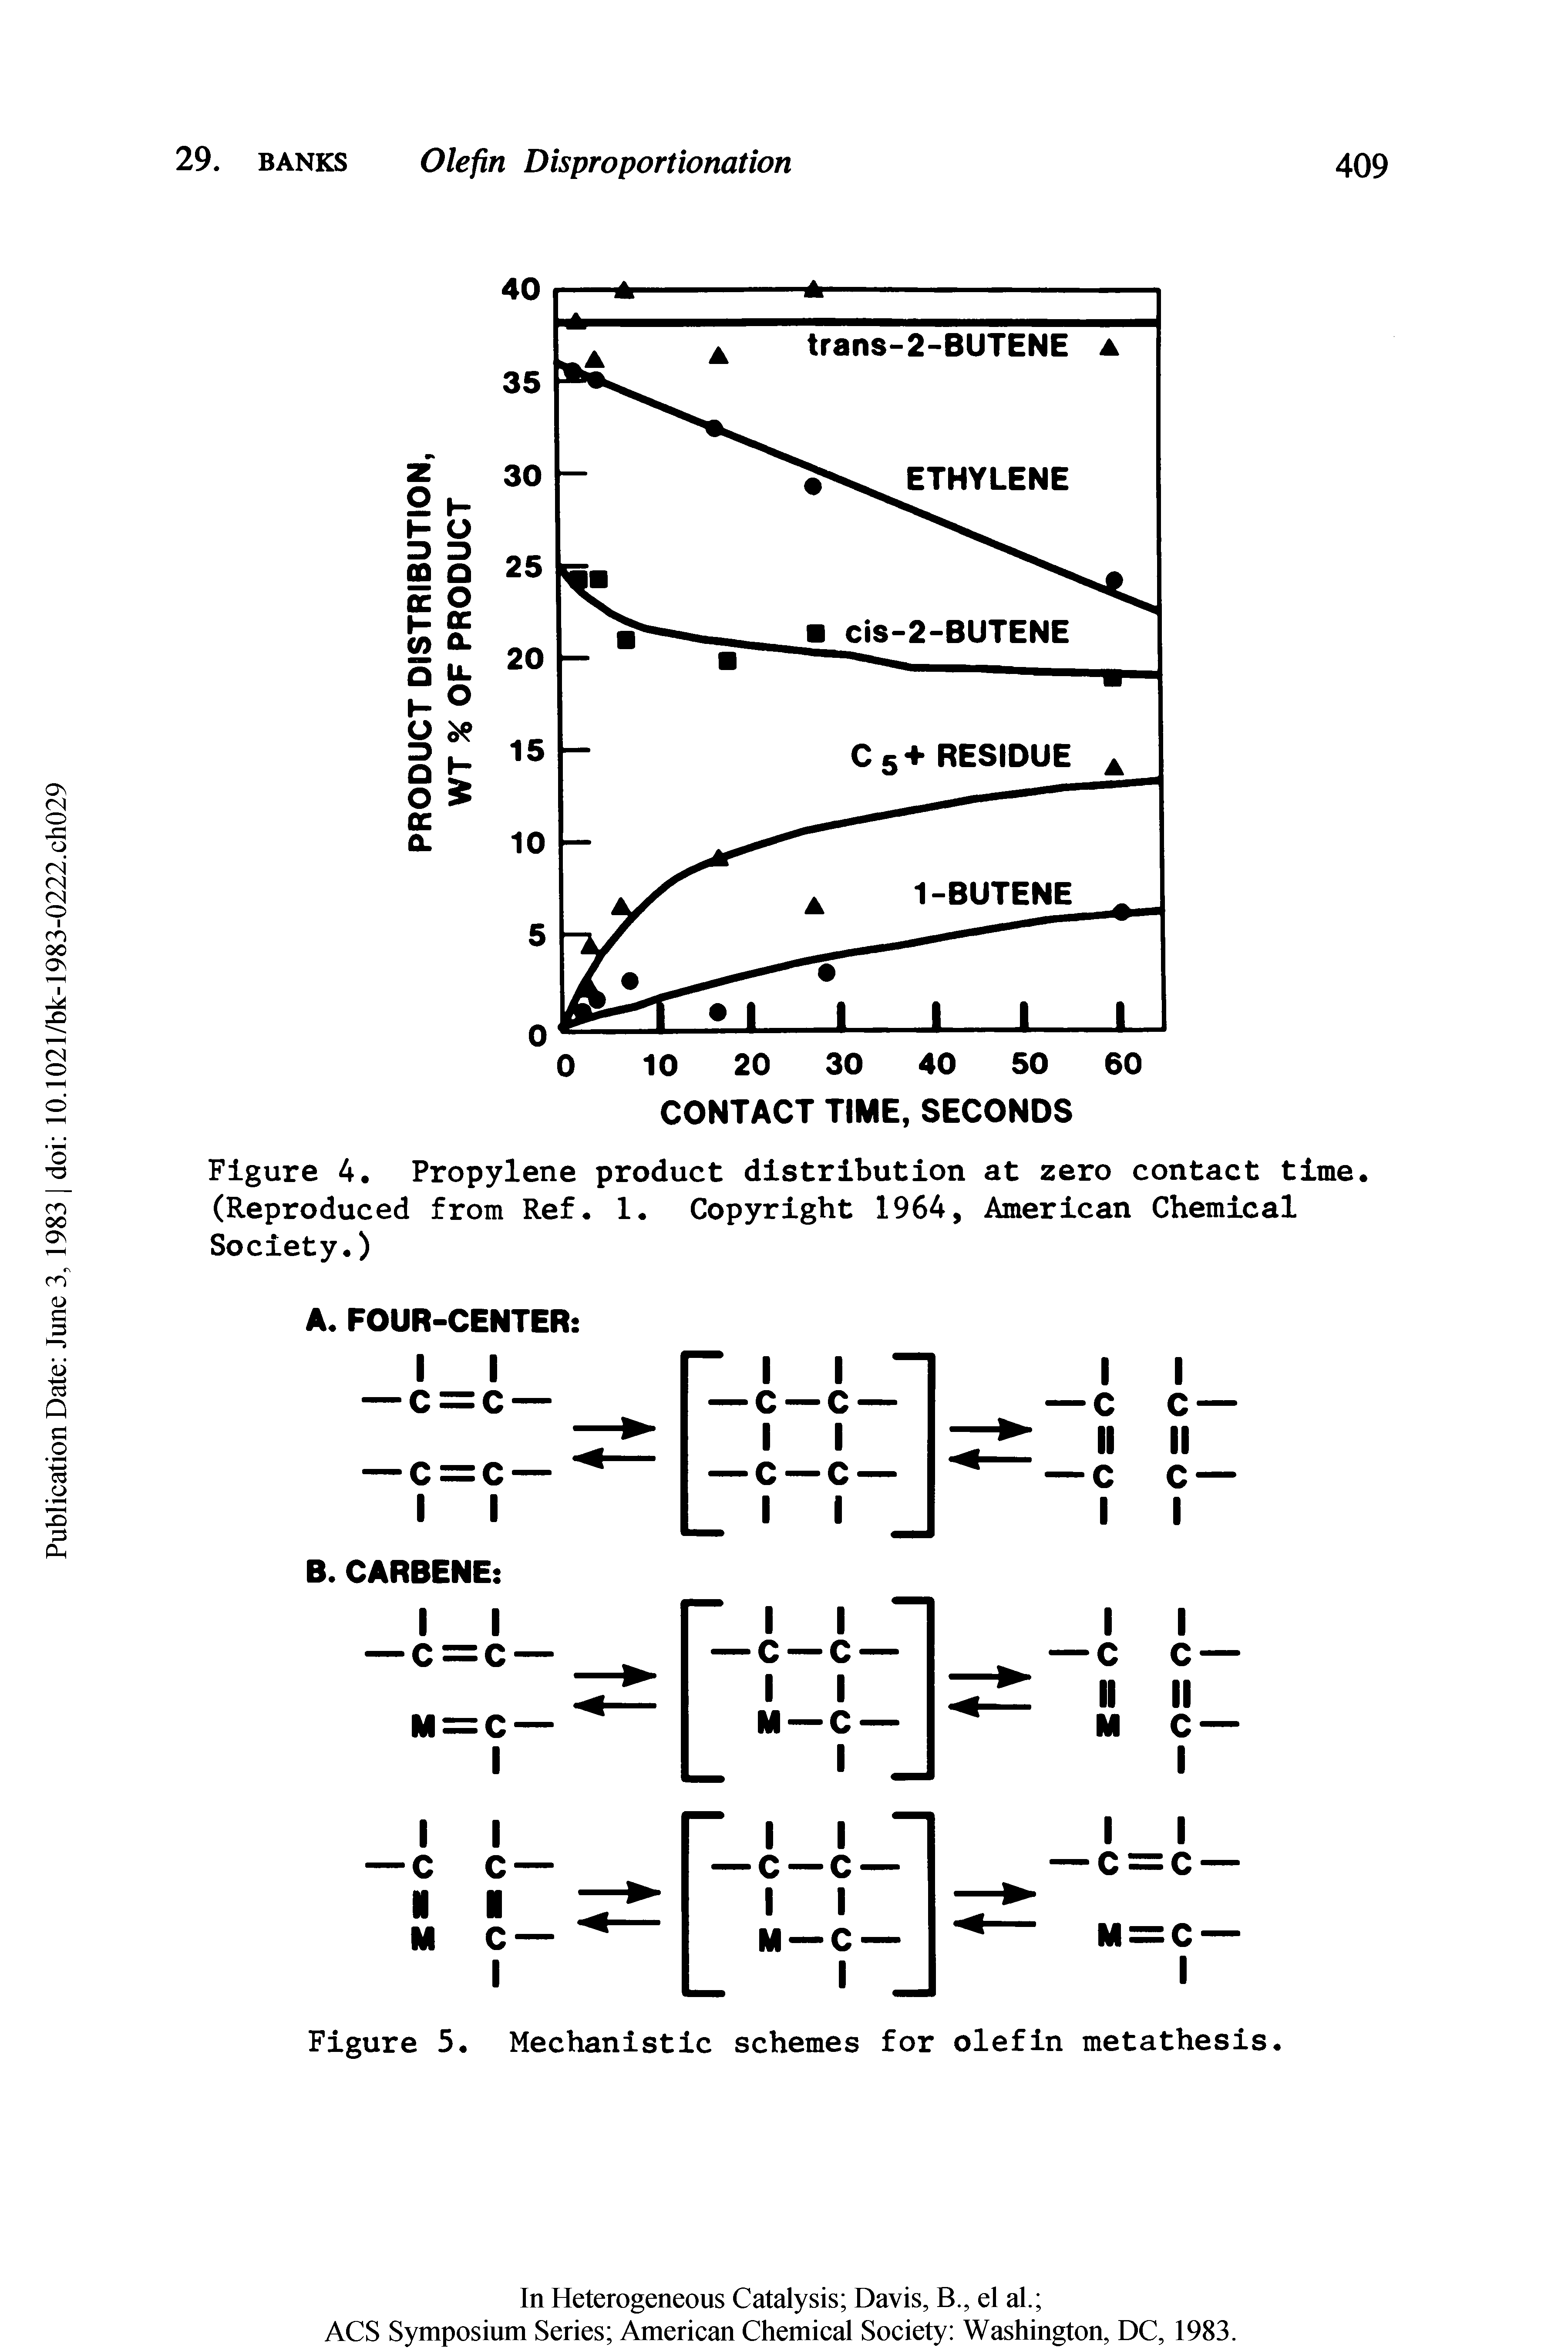 Figure 4. Propylene product distribution at zero contact time (Reproduced from Ref. 1. Copyright 1964, American Chemical Society.)...